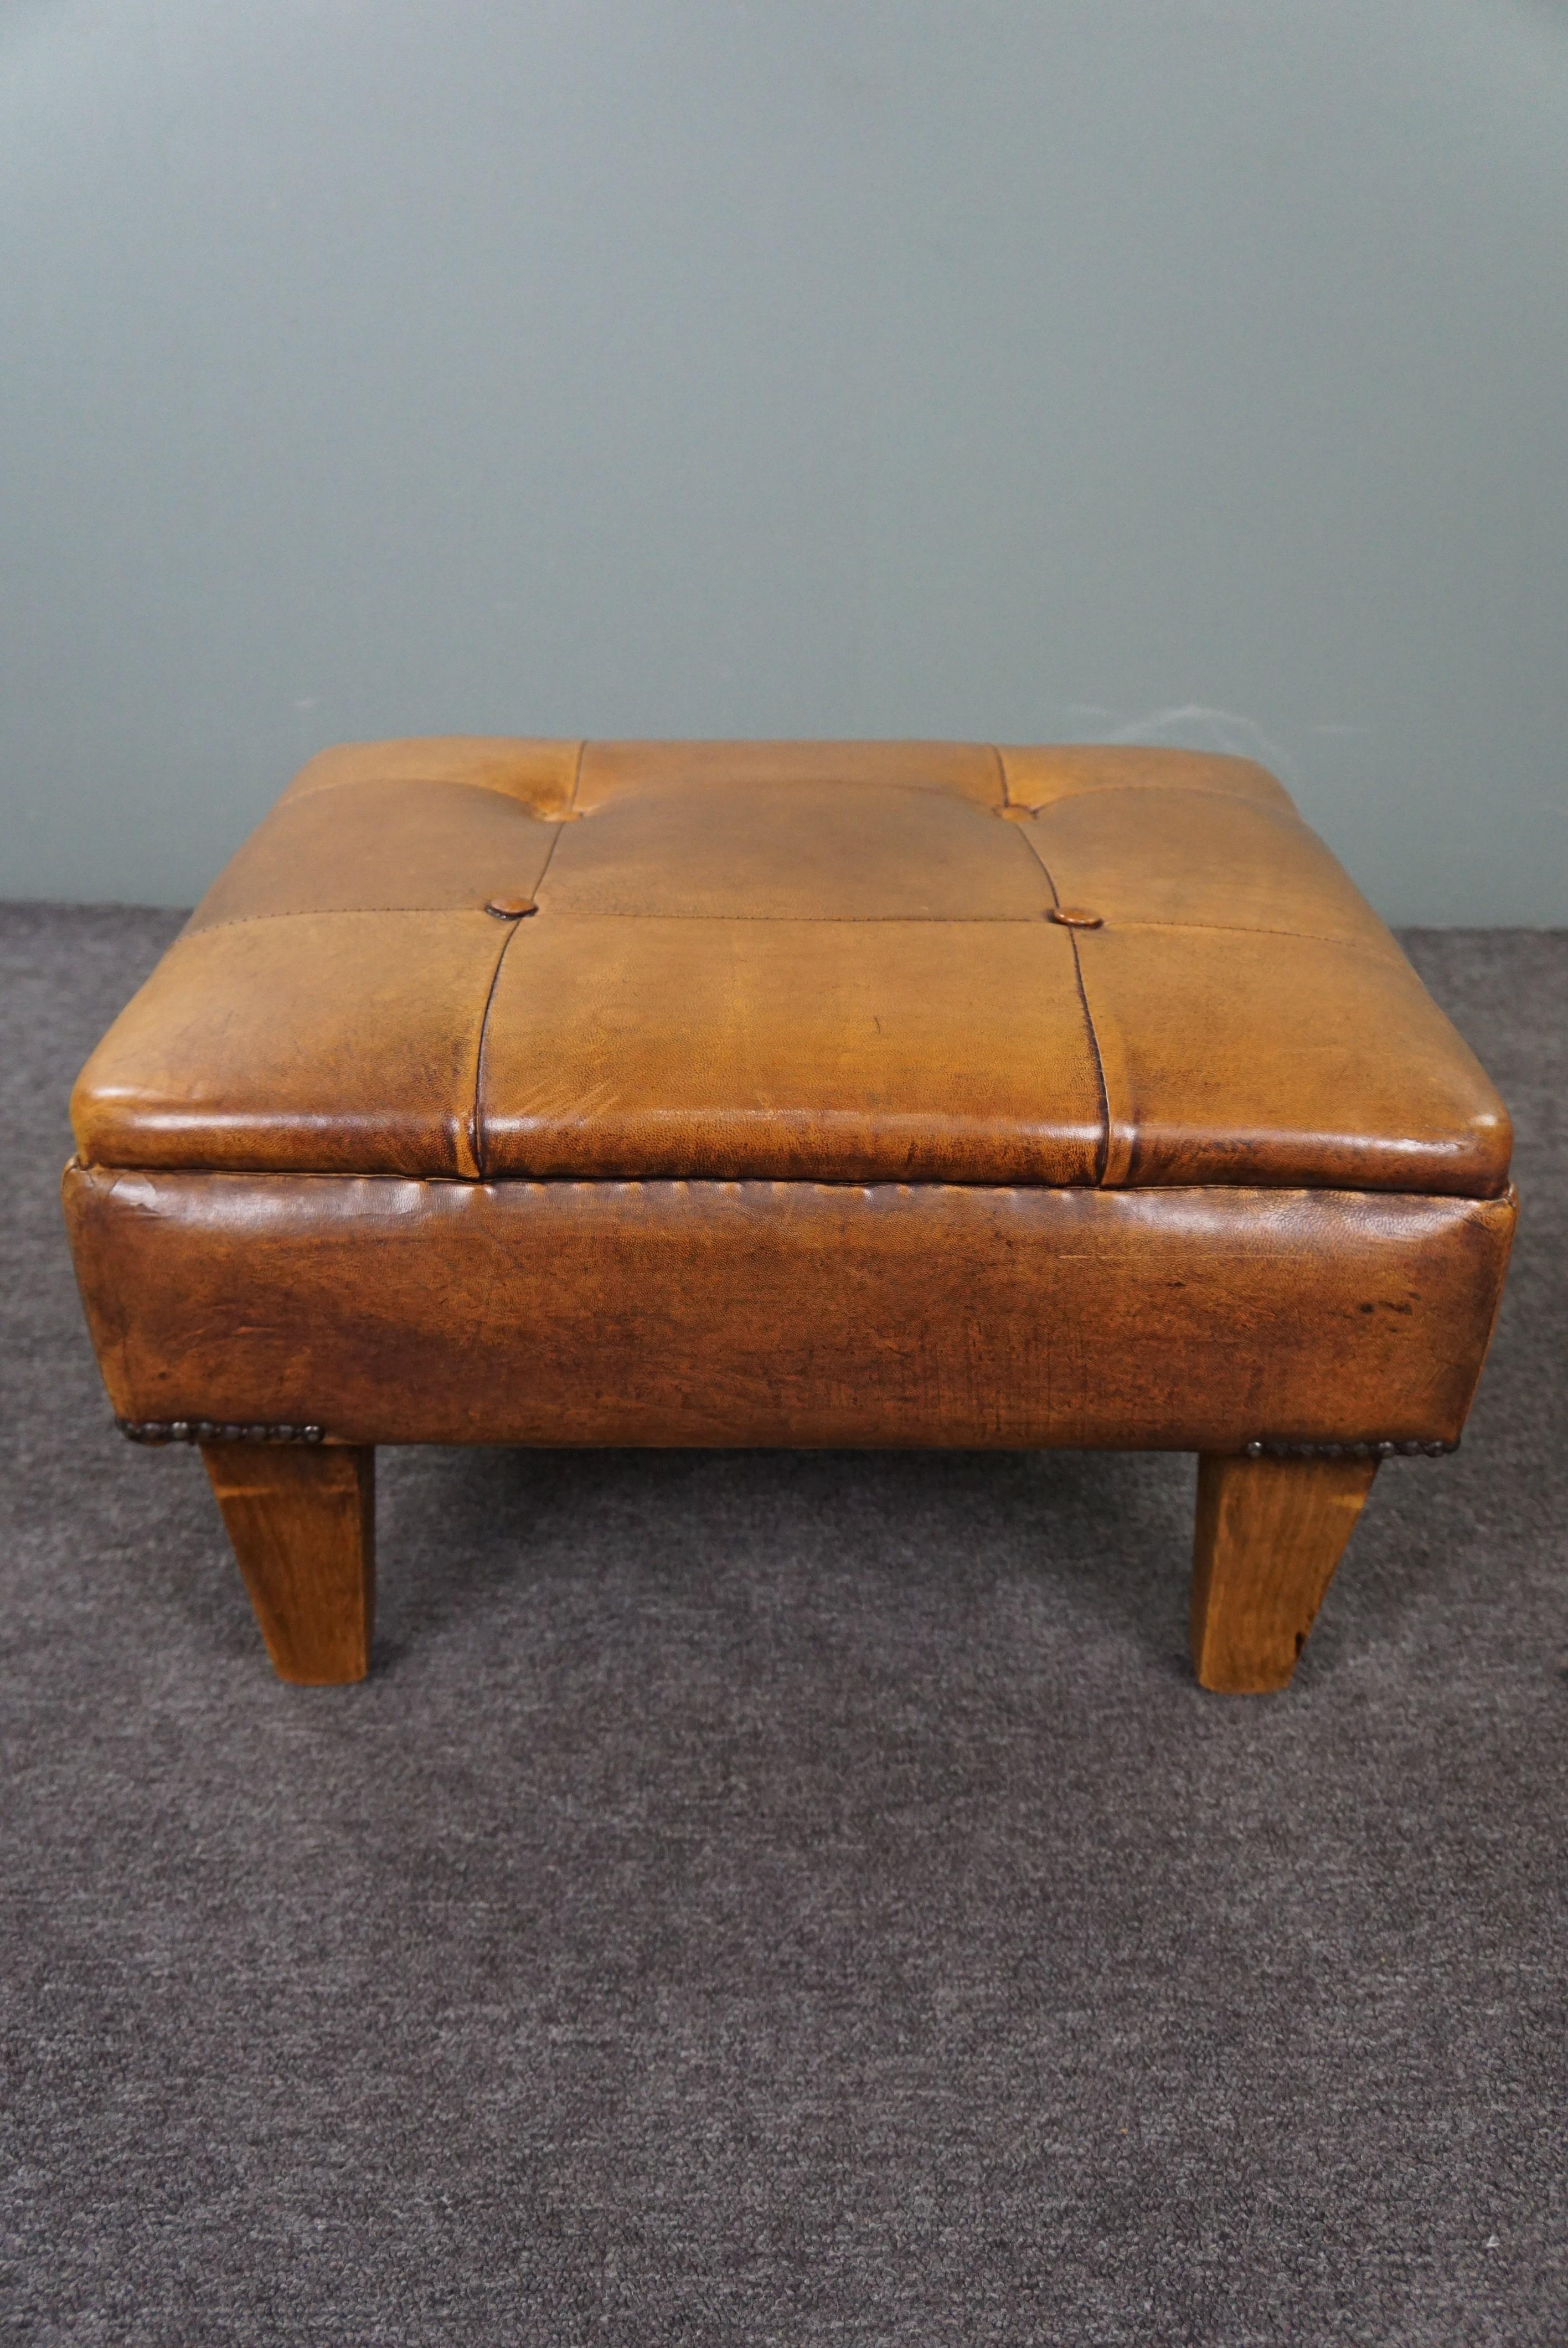 A sheepskin leather ottoman, also known as a hocker, turns your already comfortable armchair into a true relaxation paradise. Resting your feet on this ottoman allows you to further enhance your moment of relaxation. If you don't need it as a